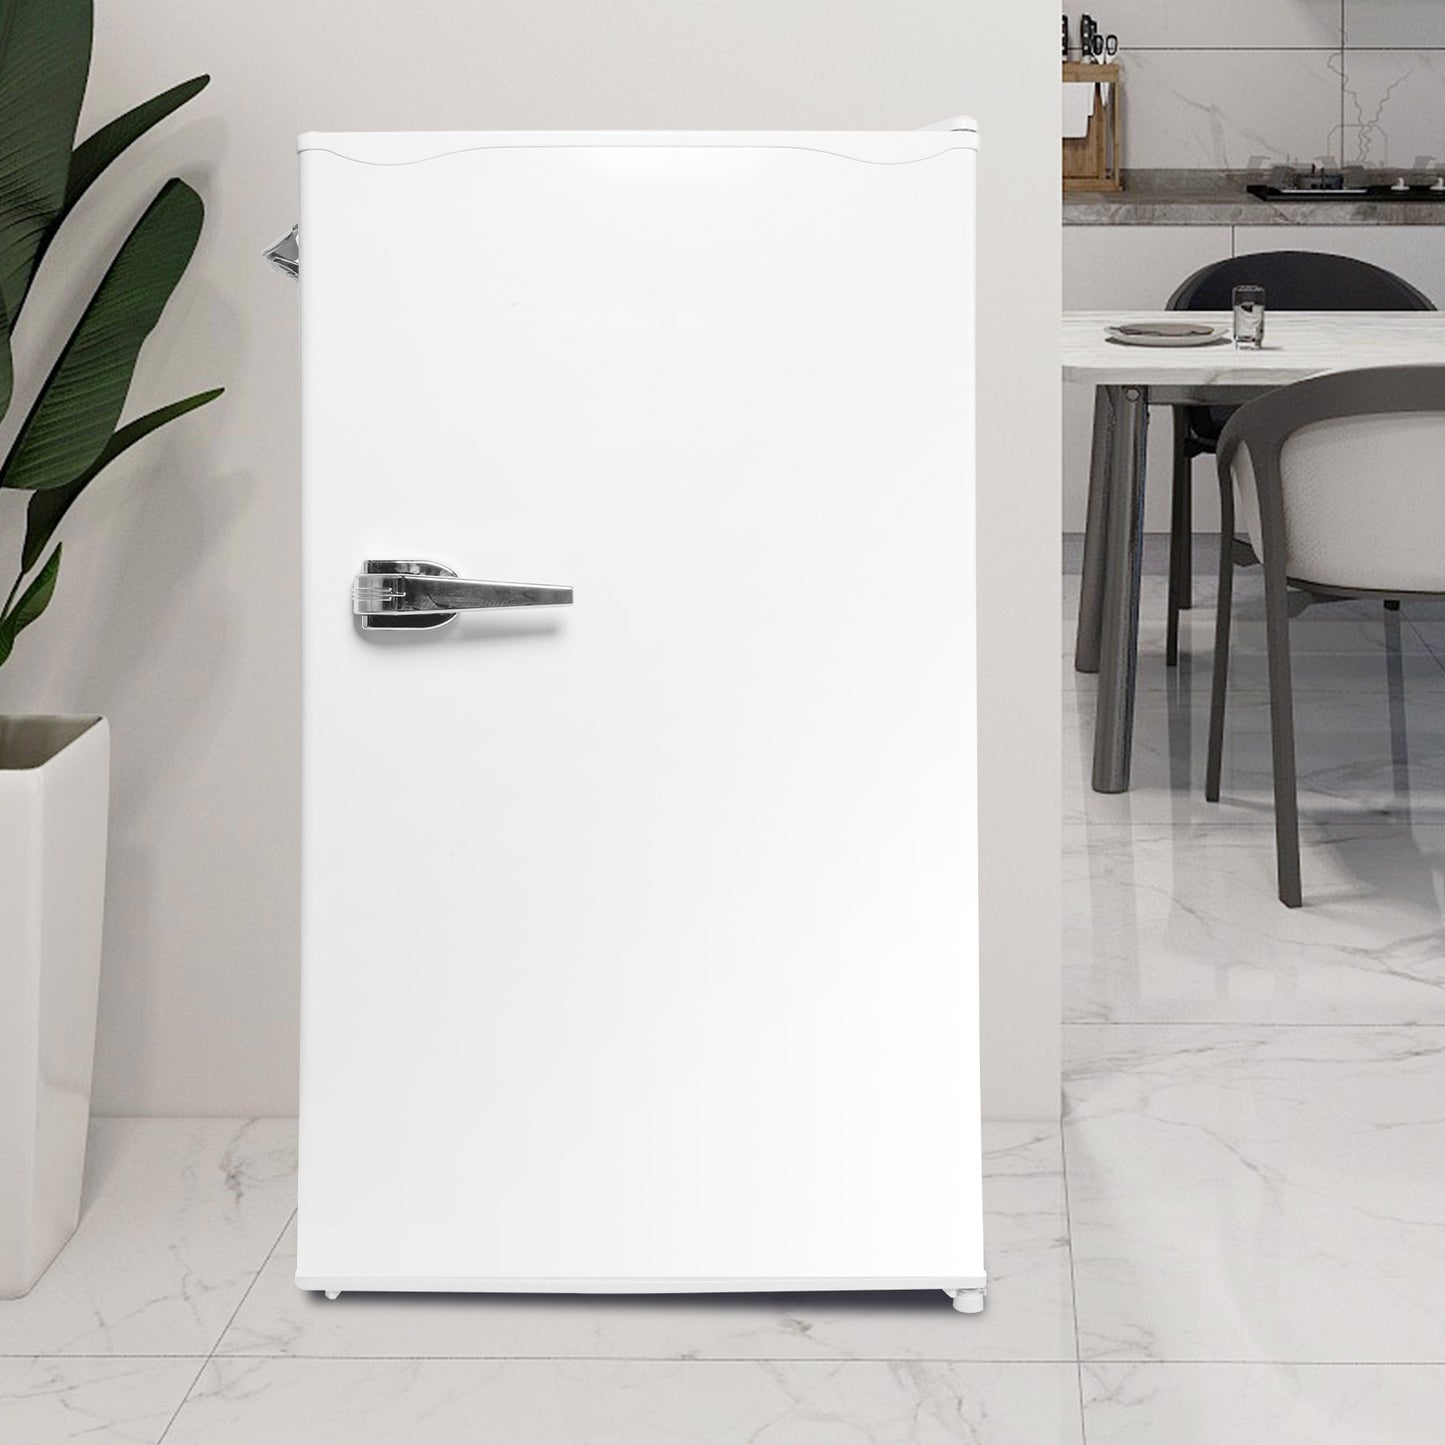 Luckyermore 3.2 Cu.Ft. Small Fridge with Freezer Compact Refrigerator with Adjustable Legs, White